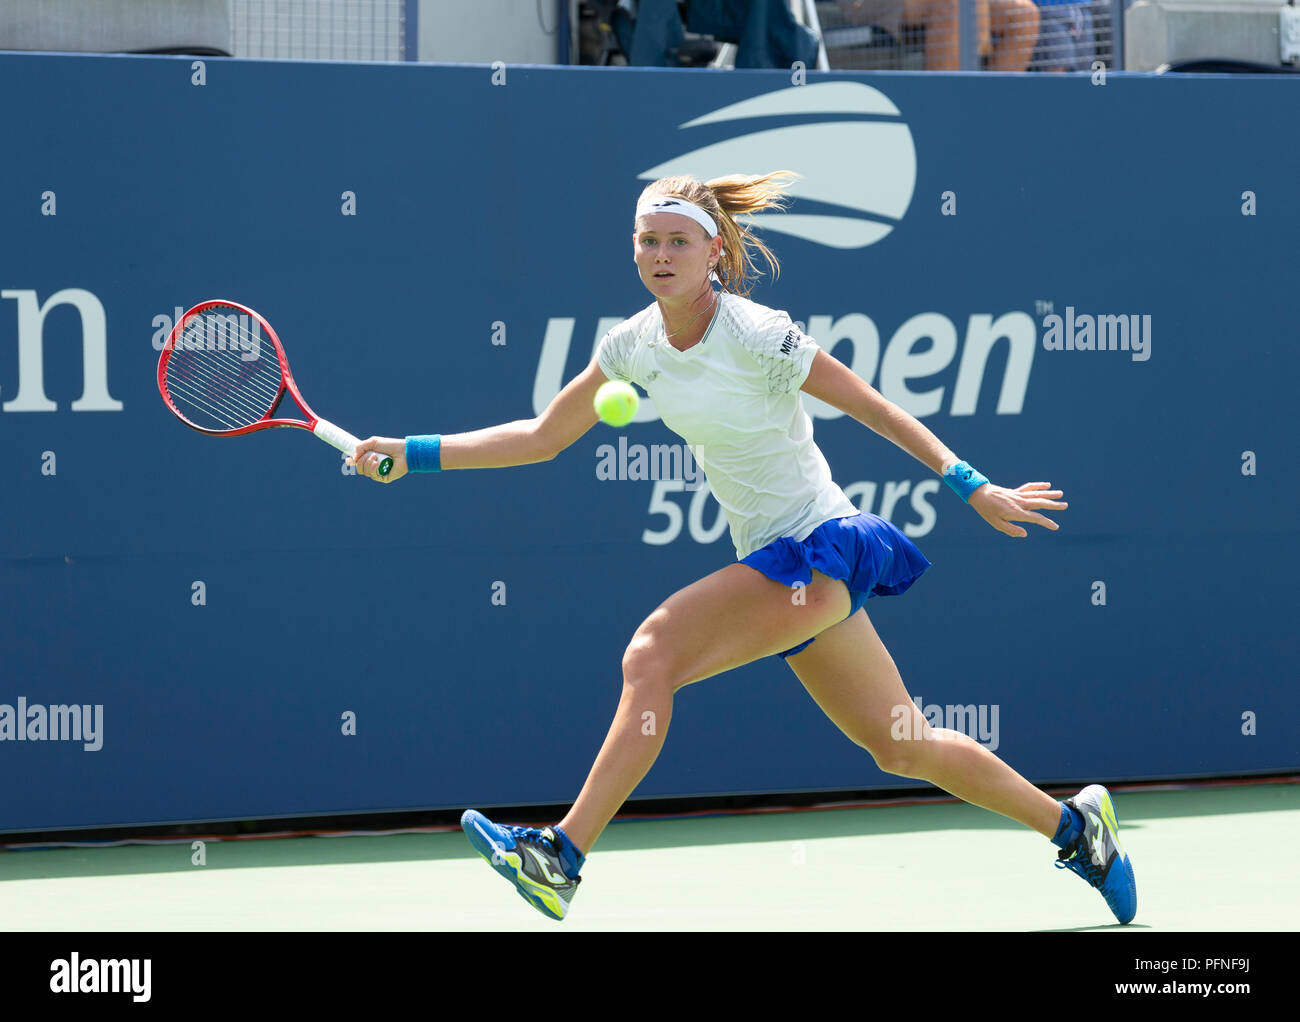 New York, NY - August 21, 2018: Marie Bouzkova of Czech Republic returns  ball during qualifying day 1 against Ann Li of USA at US Open Tennis  championship at USTA Billie Jean